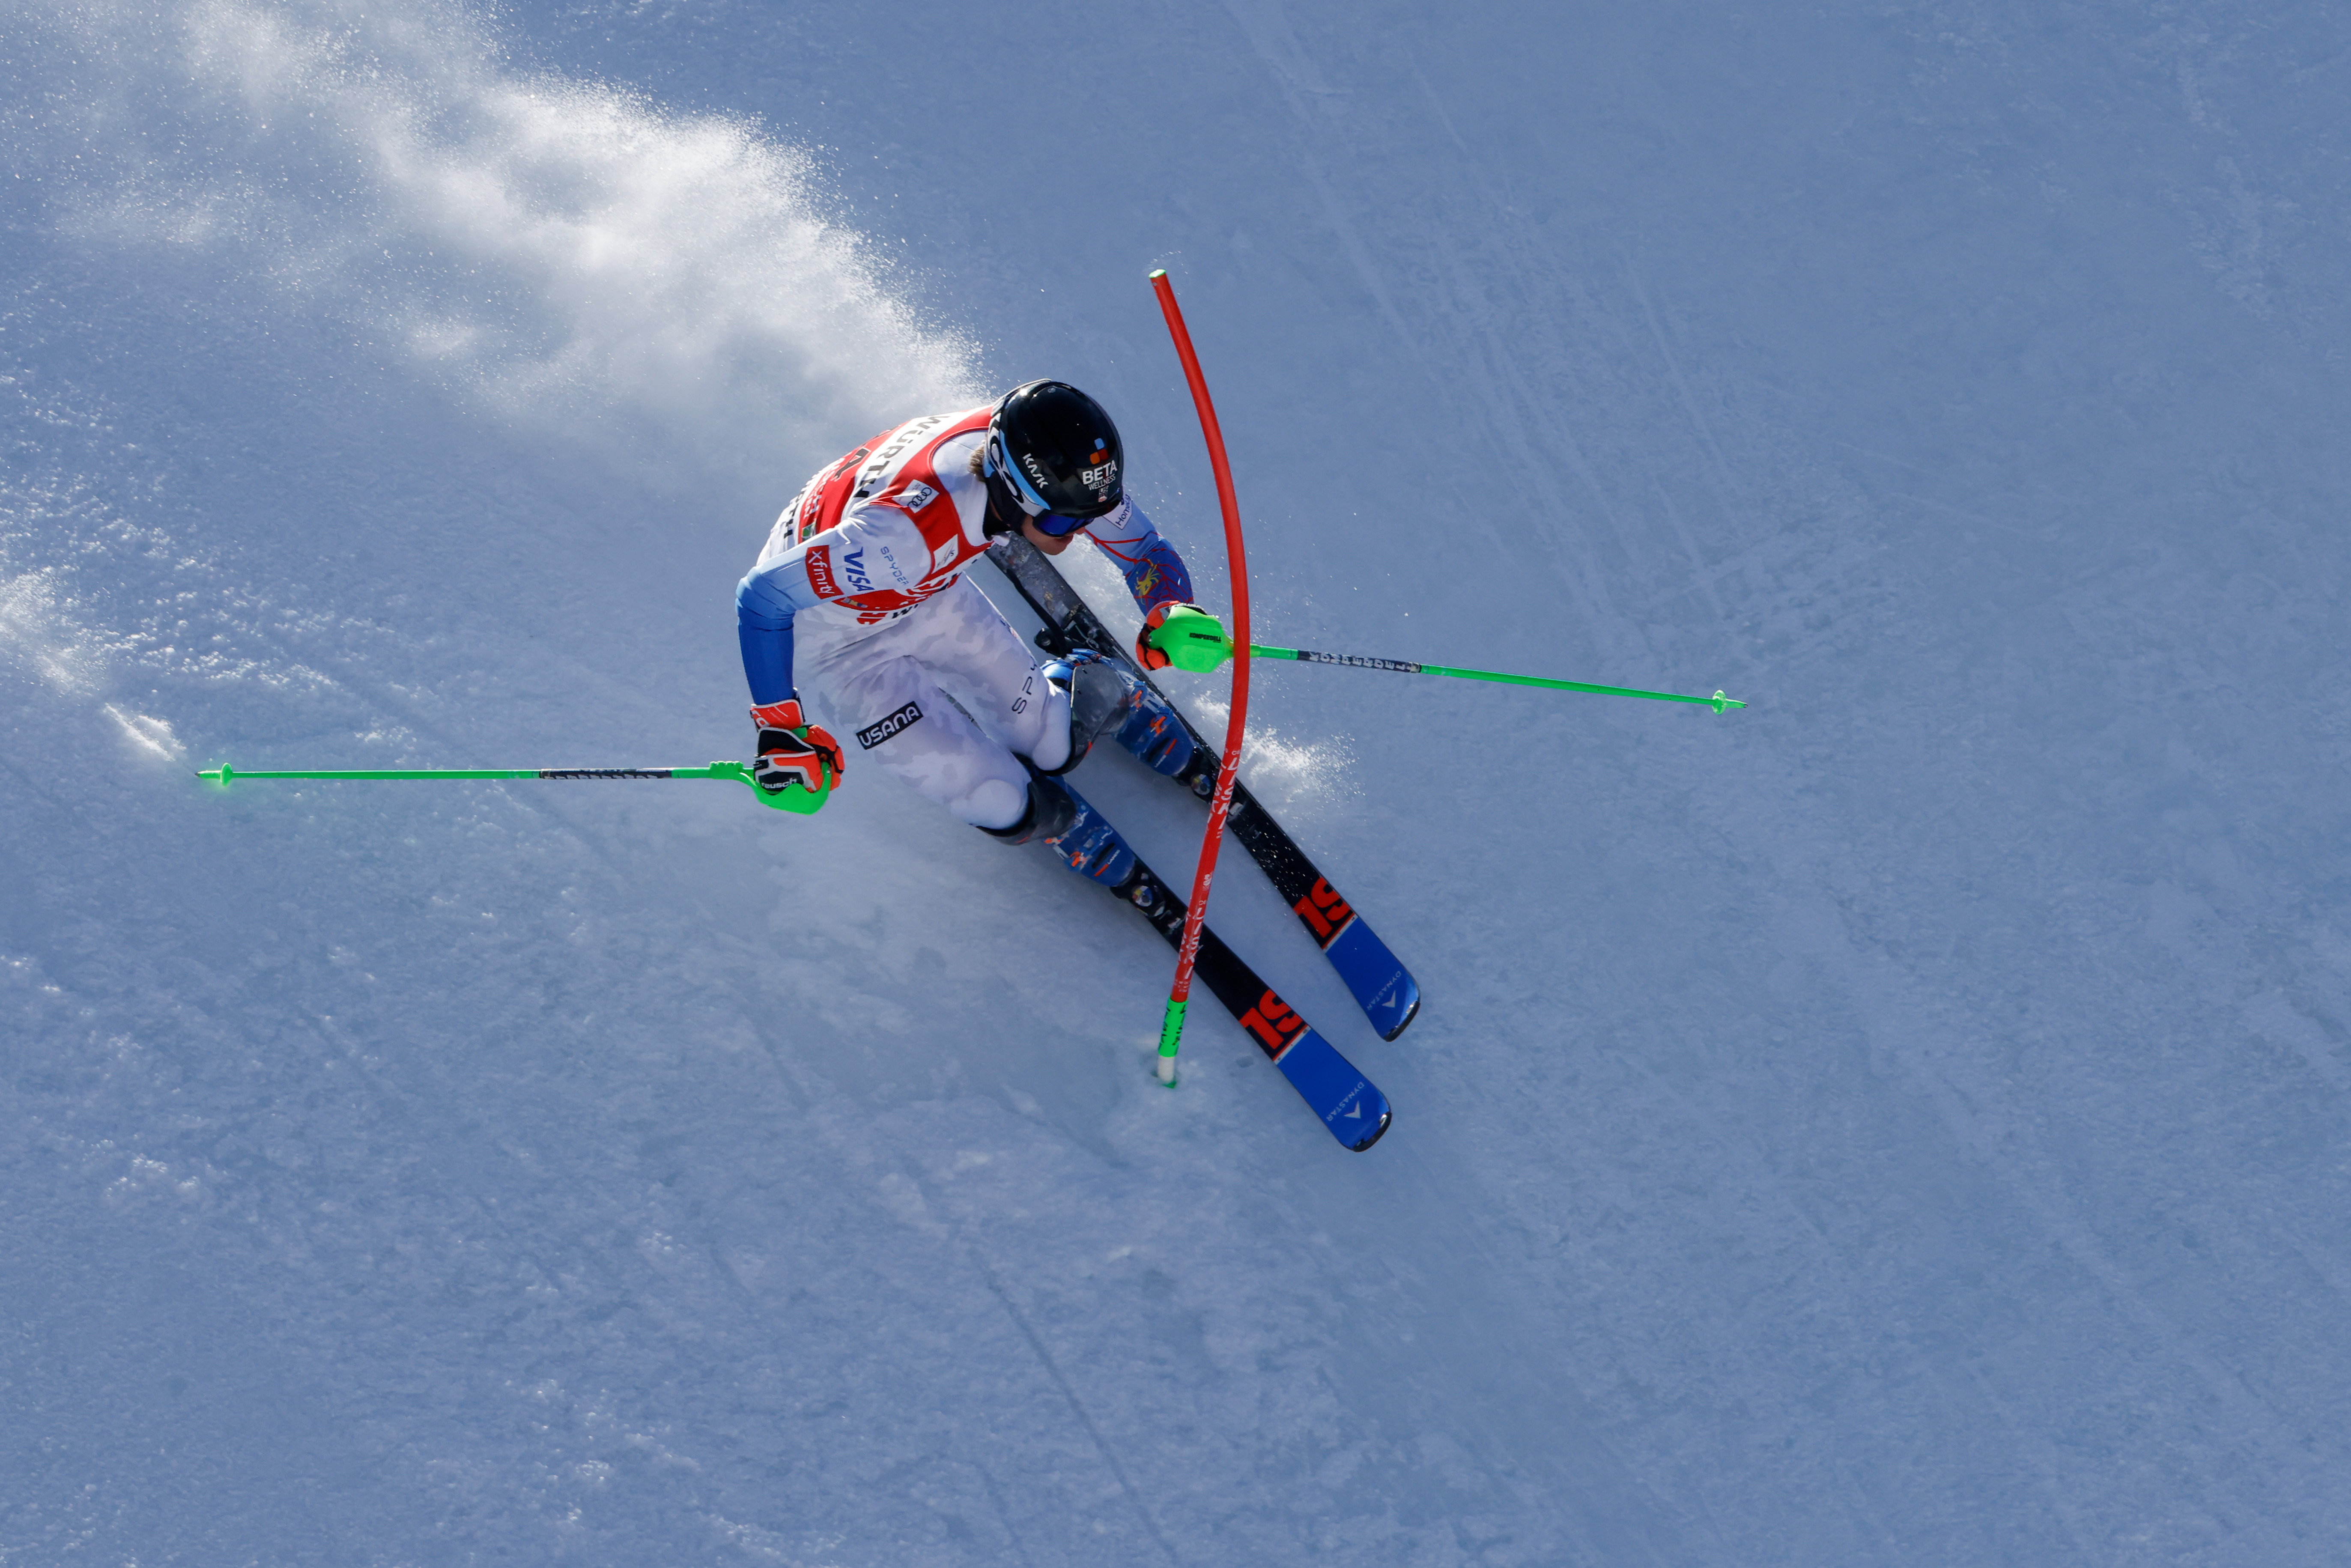 Ben Ritchie Career-Best 20th in World Cup Slalom